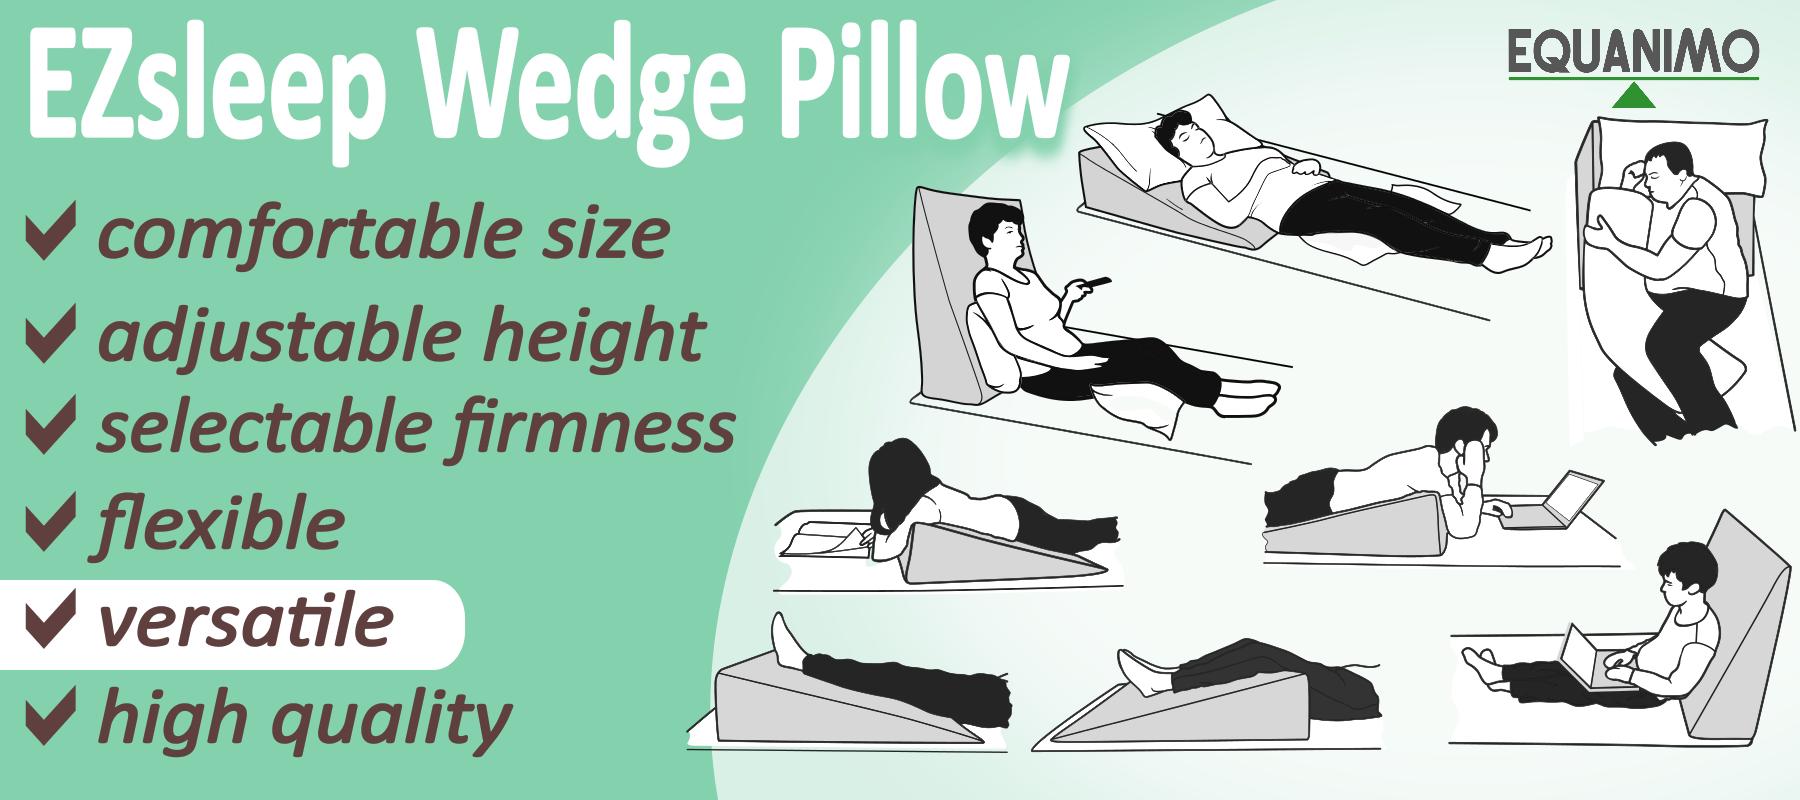 EZsleep Wedge Pillow is versatile: It can be used for sleeping, sitting or just relaxing in bed.